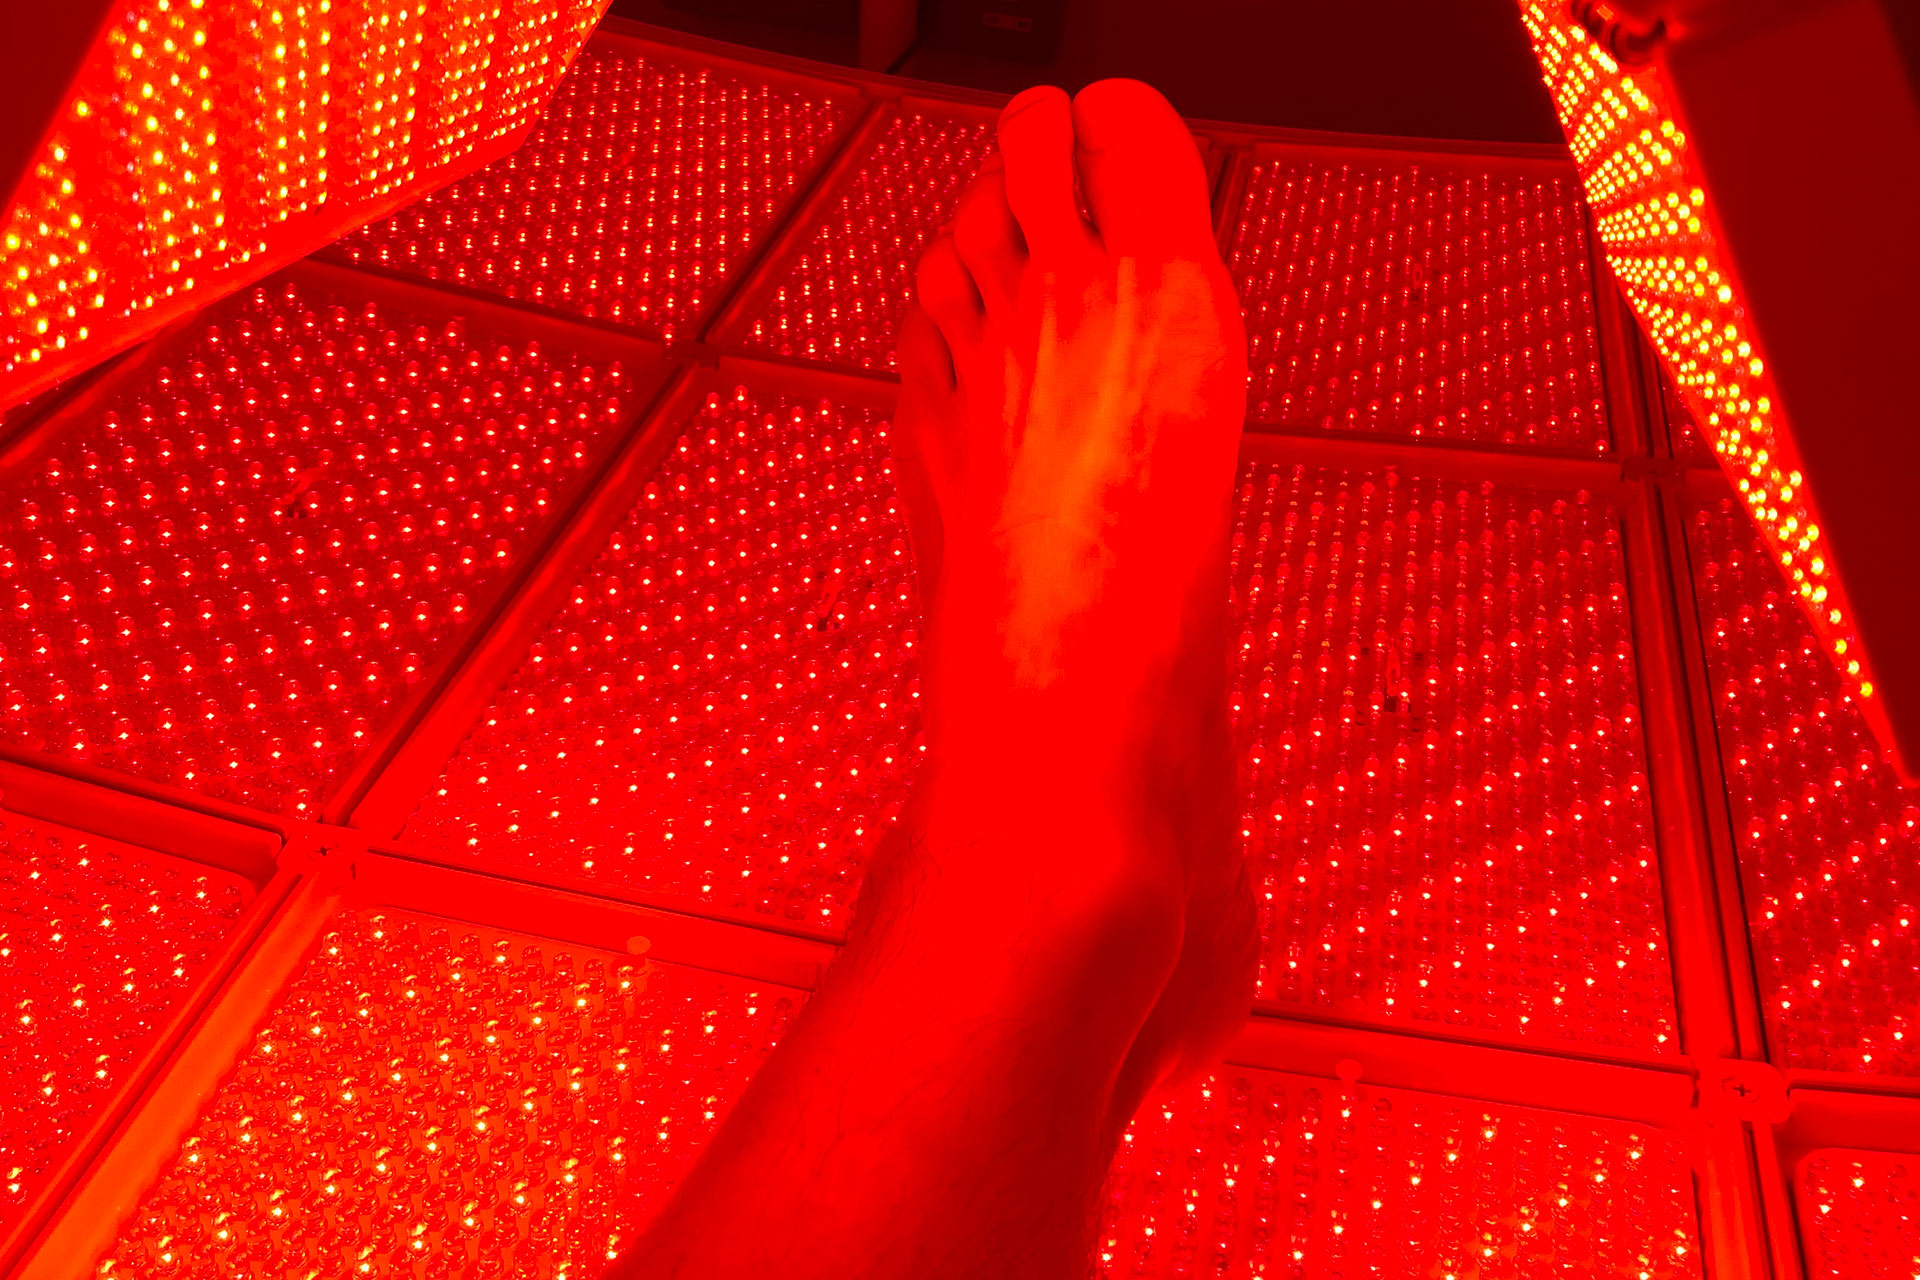 Red light therapy for eversion ankle sprain